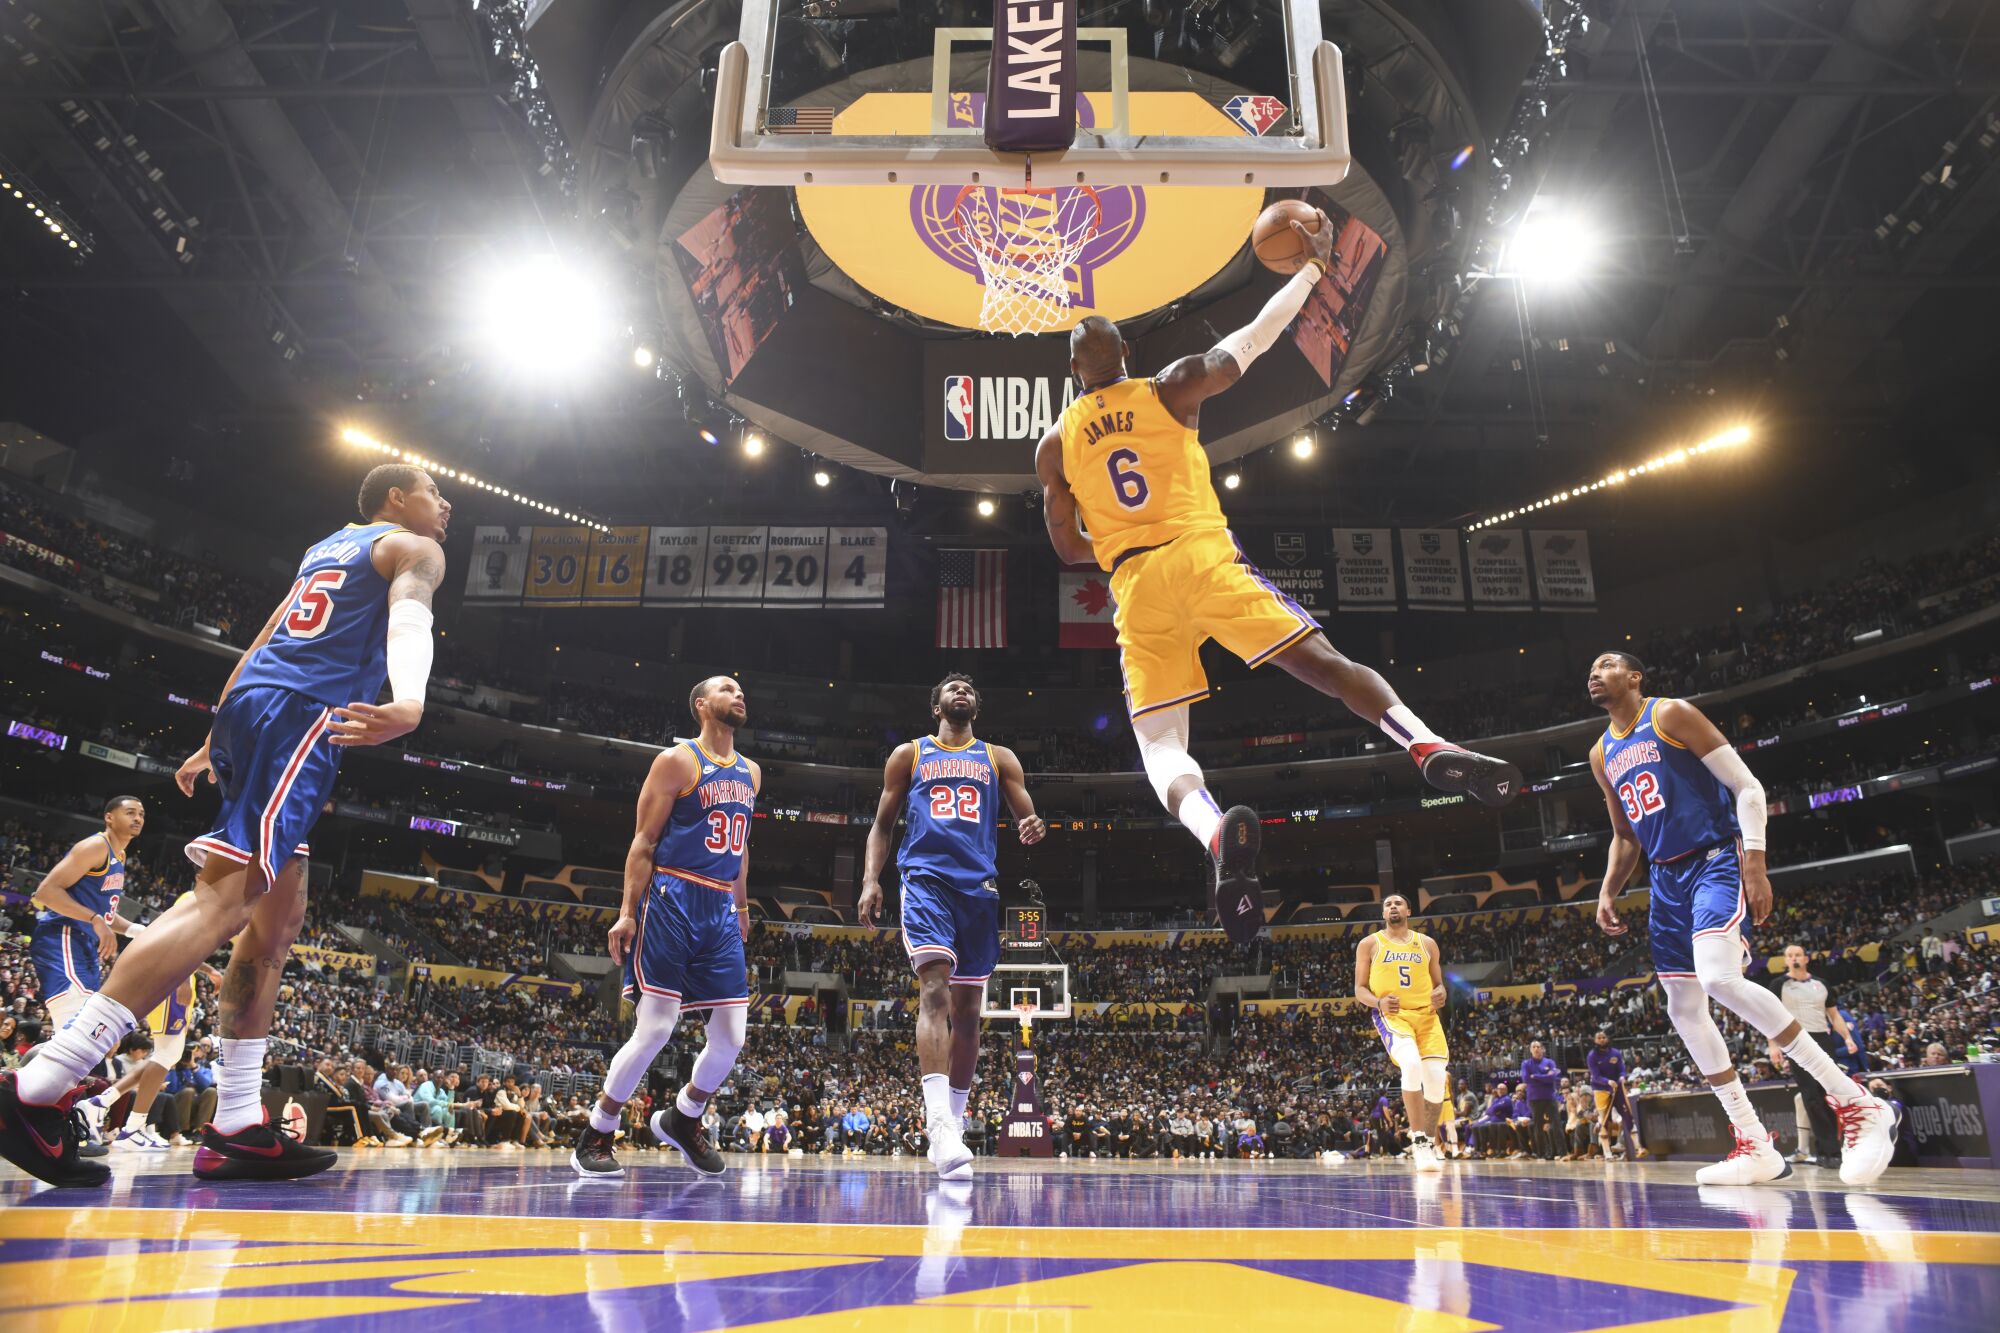 Lakers star LeBron James dunks during the second half of a 124-116 win over the Golden State Warriors.